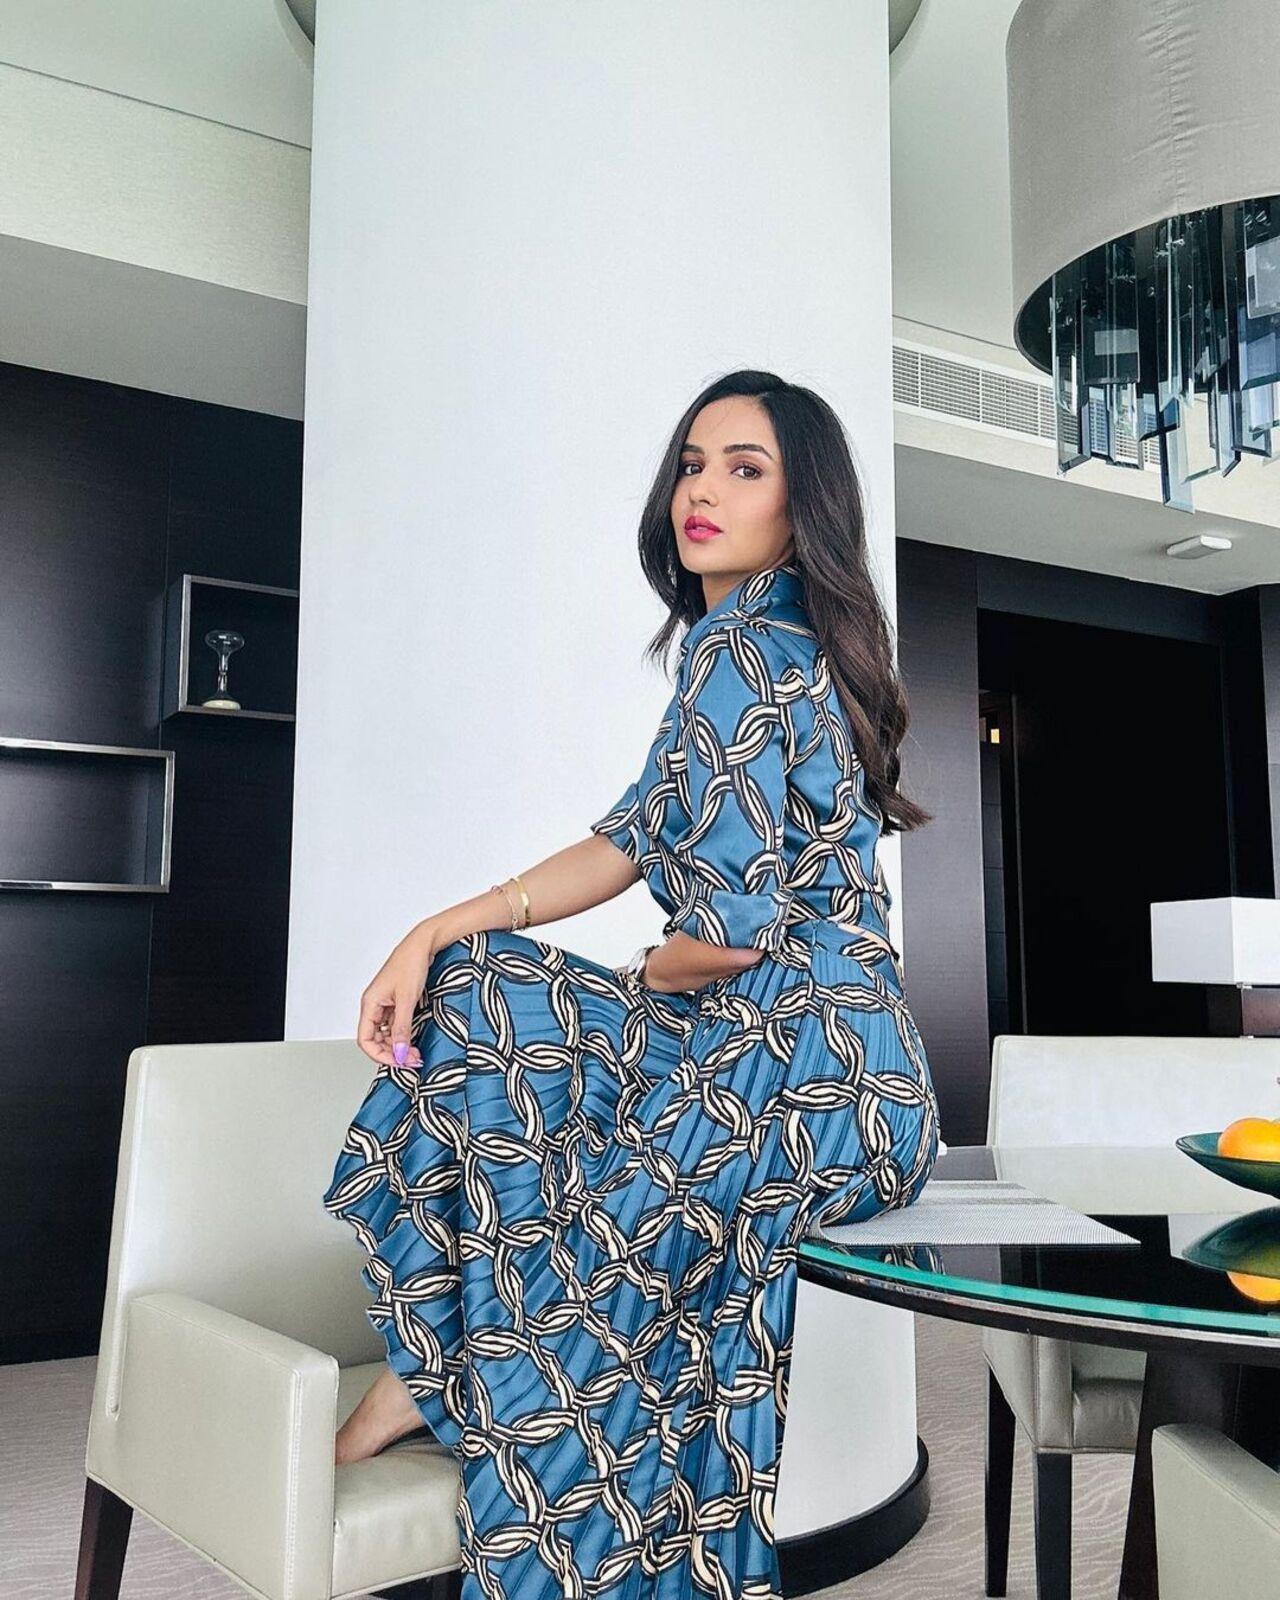 For this look, Jasmine Bhasin chose a beautiful blue printed outfit